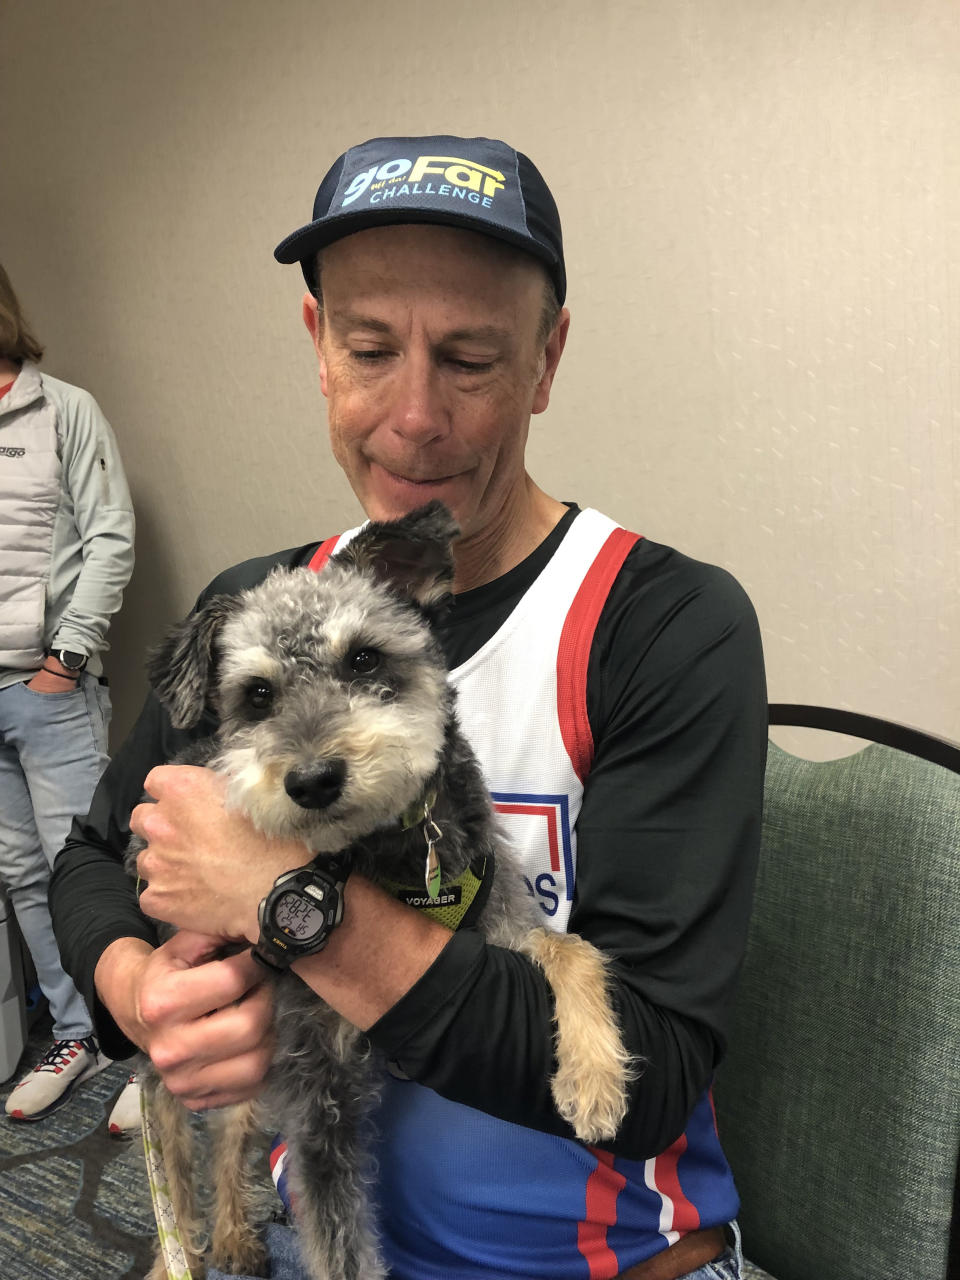 Perri, pictured with his beloved dog, was diagnosed with stage 3 prostate cancer. A few months later, he learned the cancer had spread, changing the diagnosis to a stage 4.  (Courtesy Tom Perri)